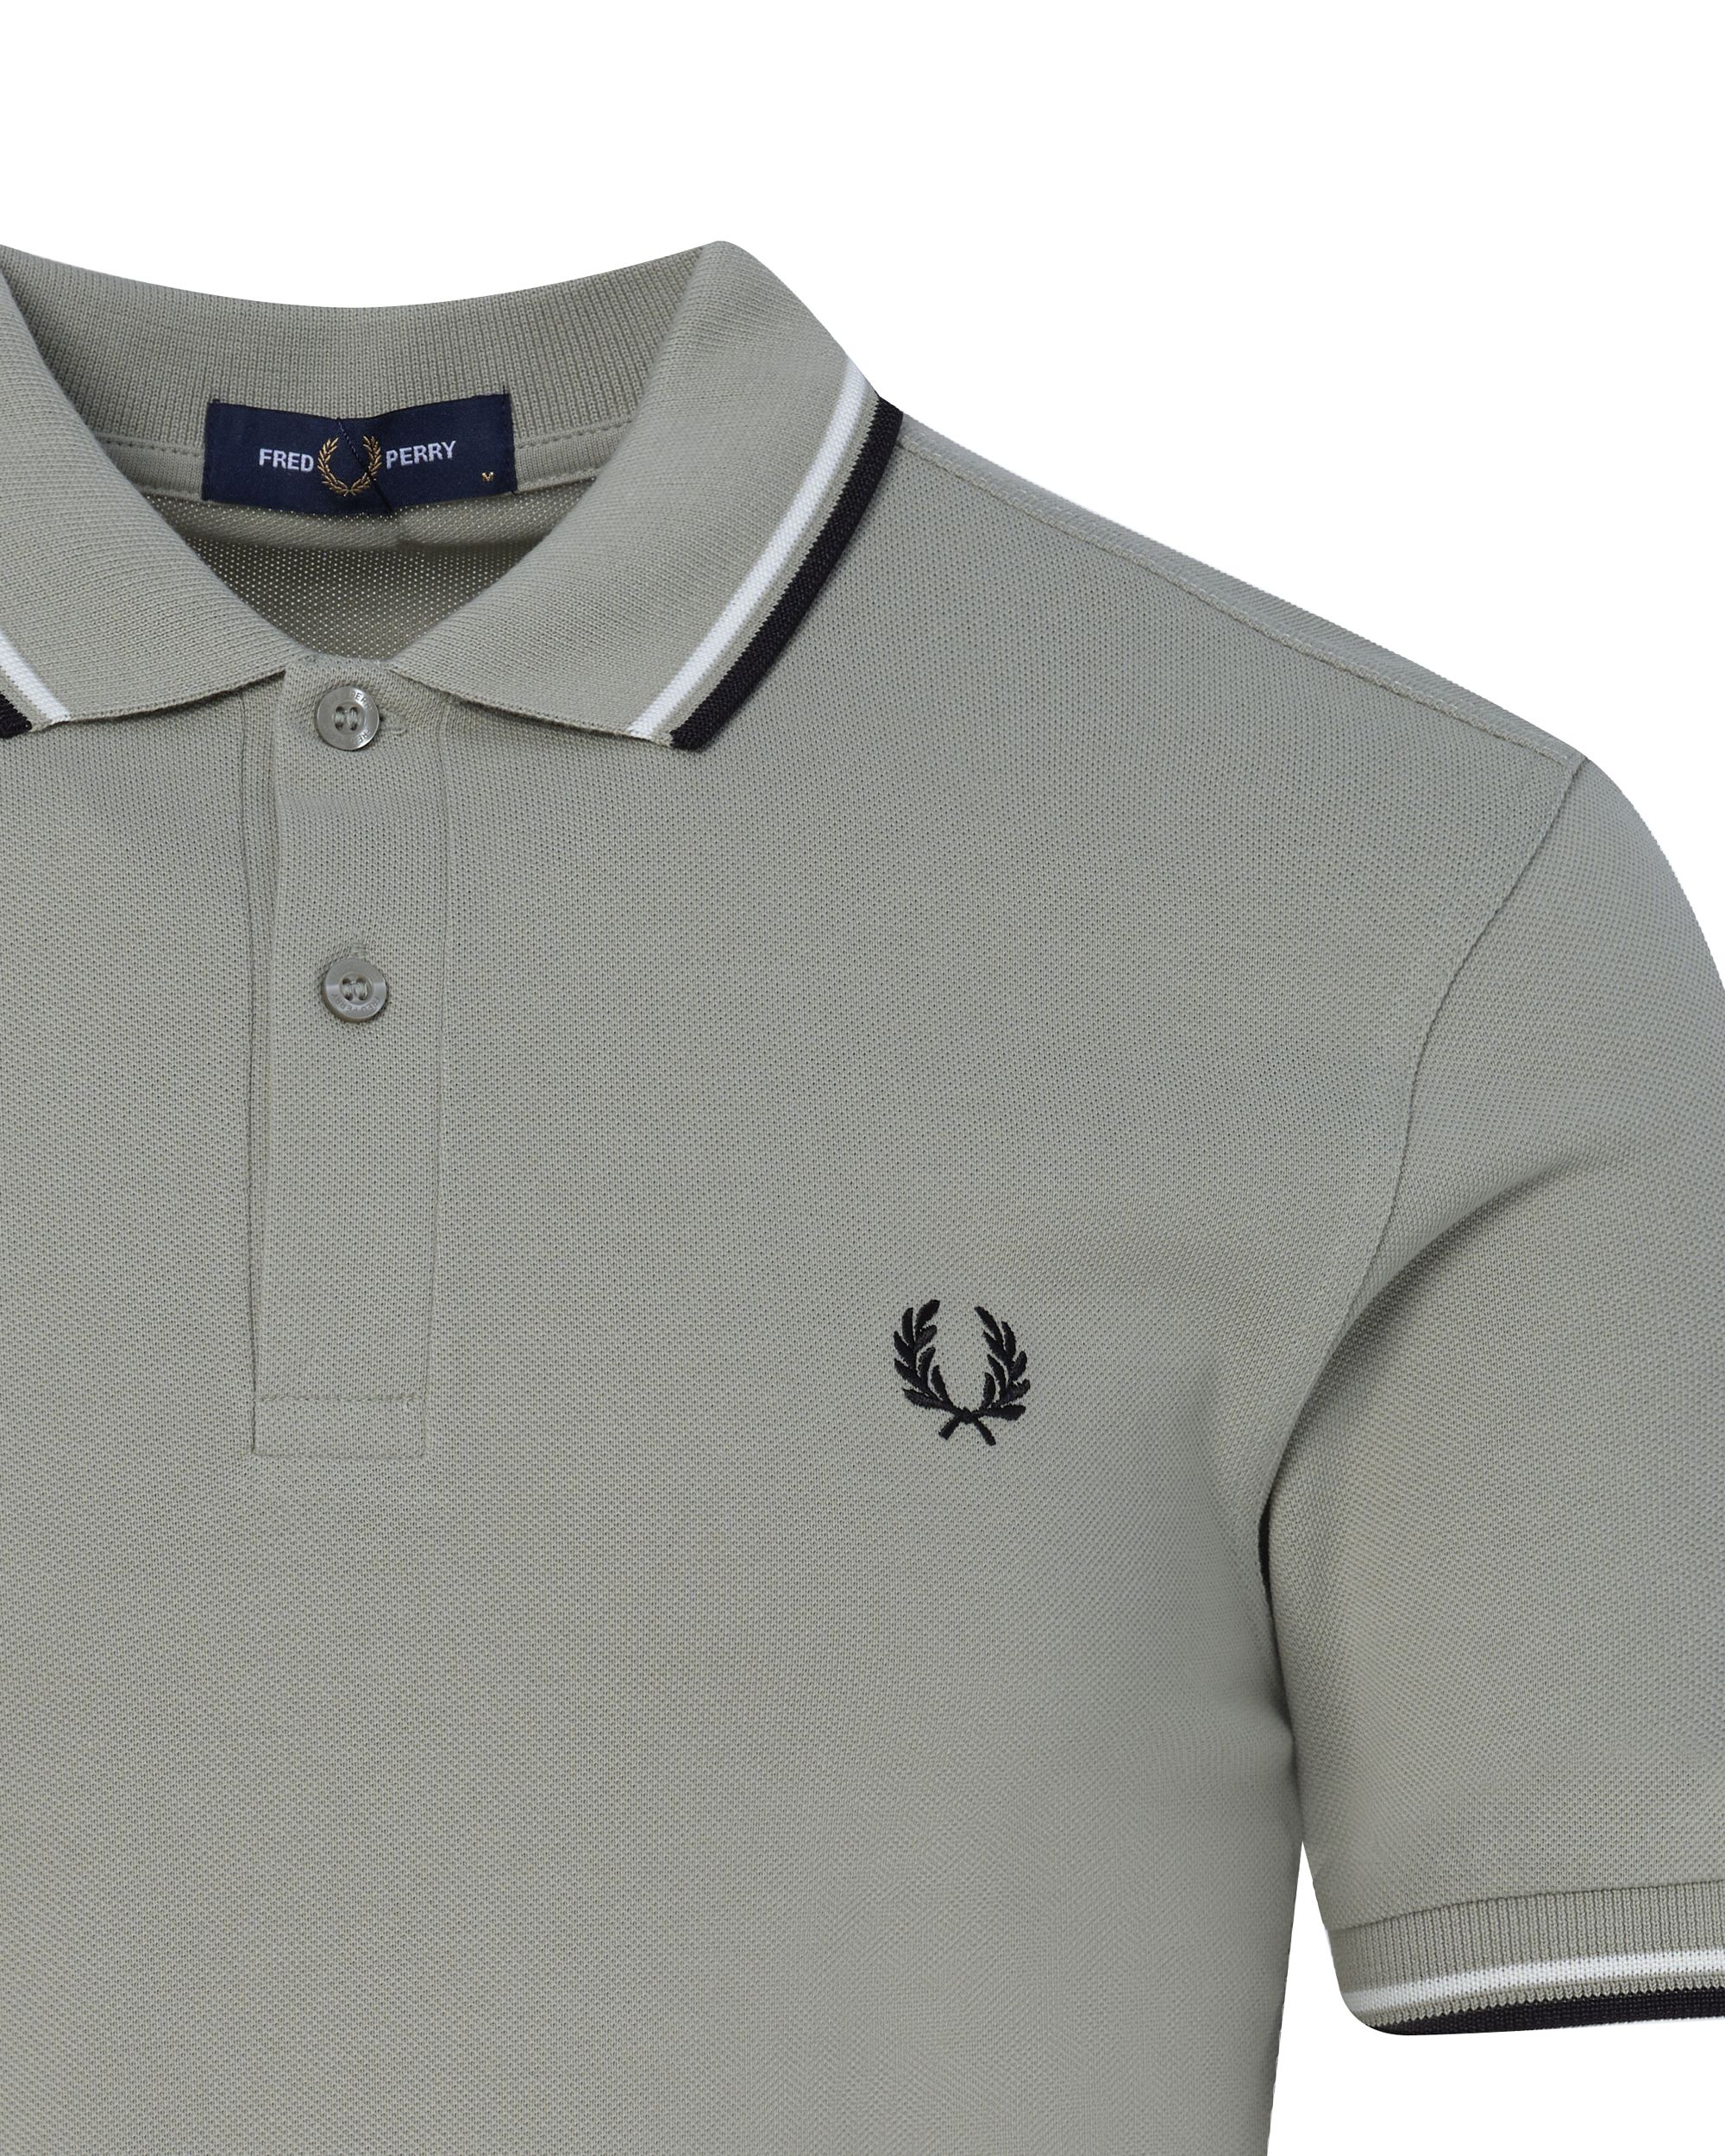 Fred Perry Polo KM Licht groen 083529-001-L